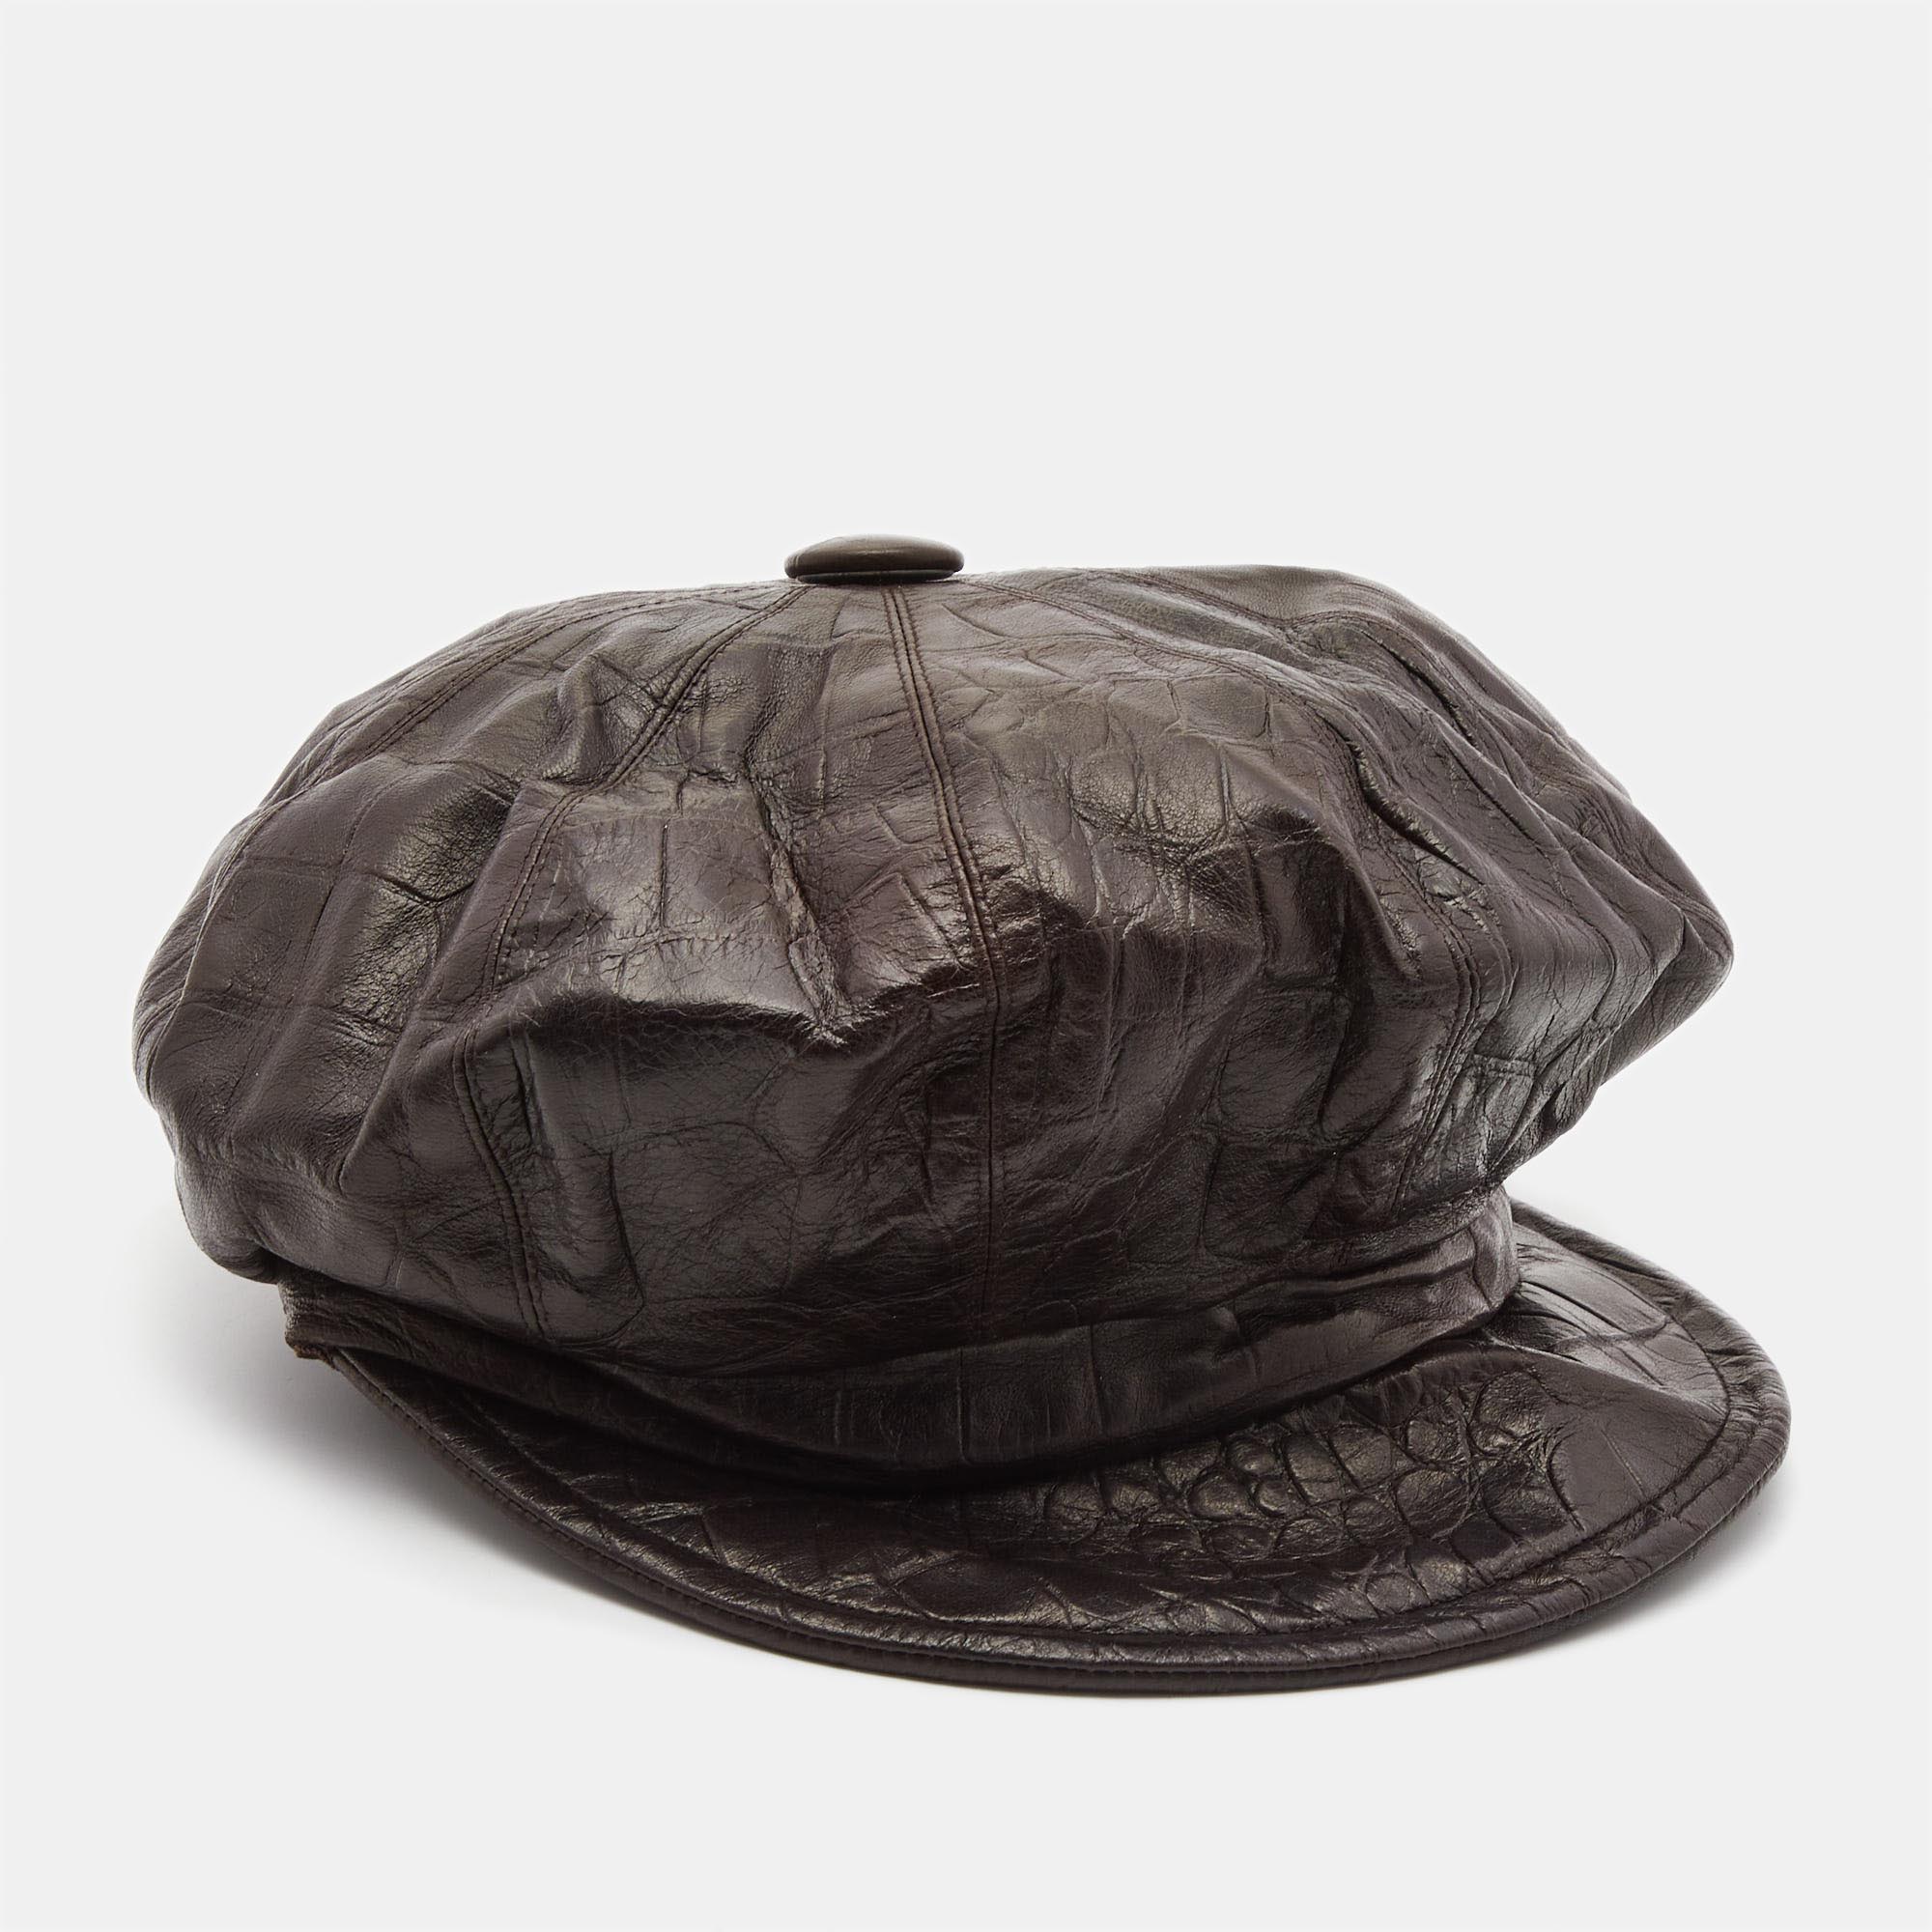 Christian dior boutique brown croc embossed leather newsboy hat size 58